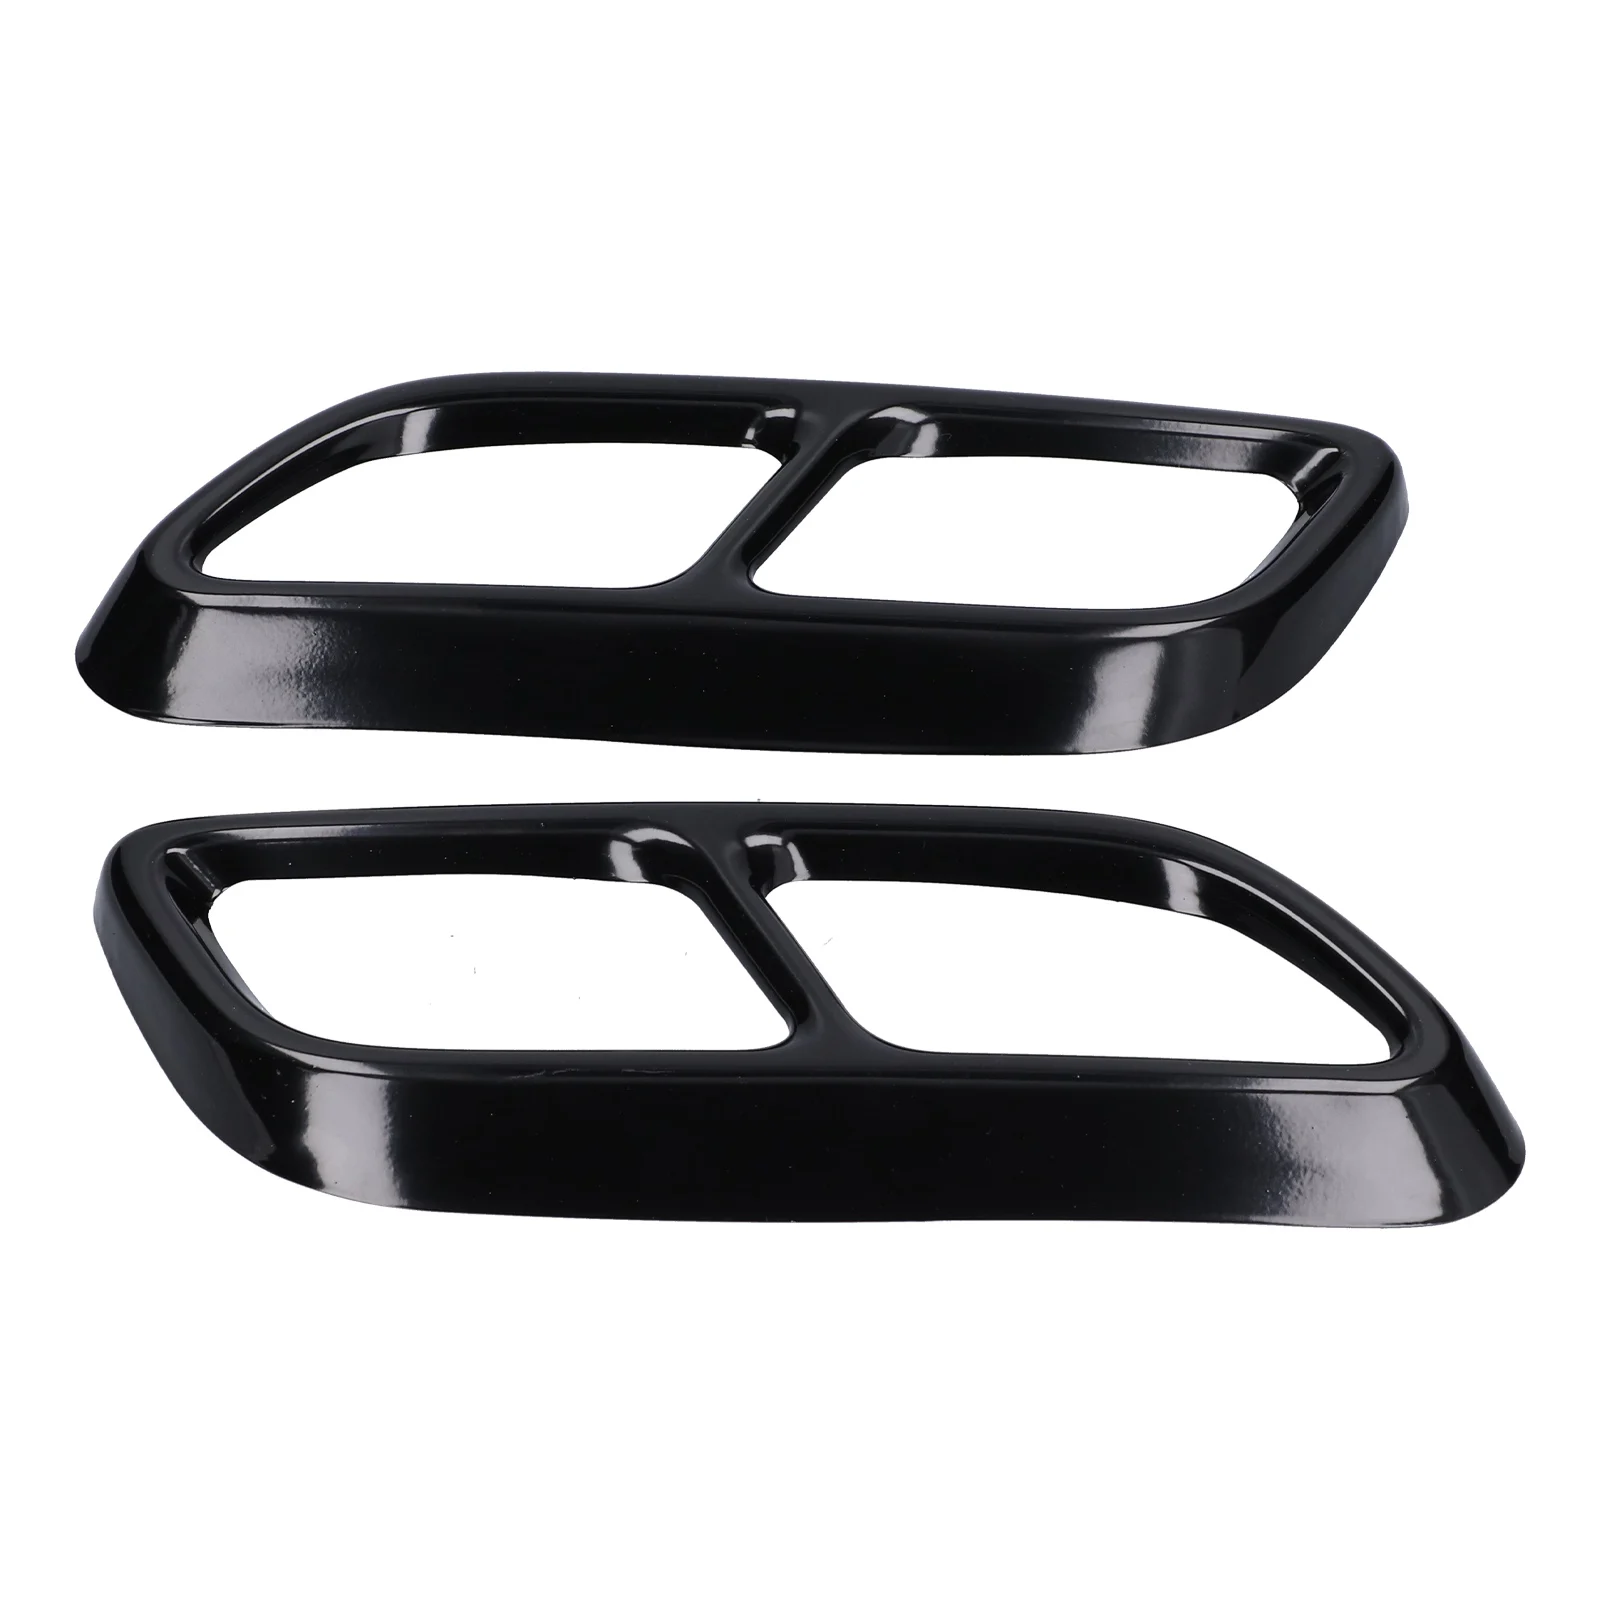 

2PCS 4‑Out Exhaust Tip Trim Tail Throat Frame Quad Outlet Glossy Black Replacement for Cadillac CT5 2020